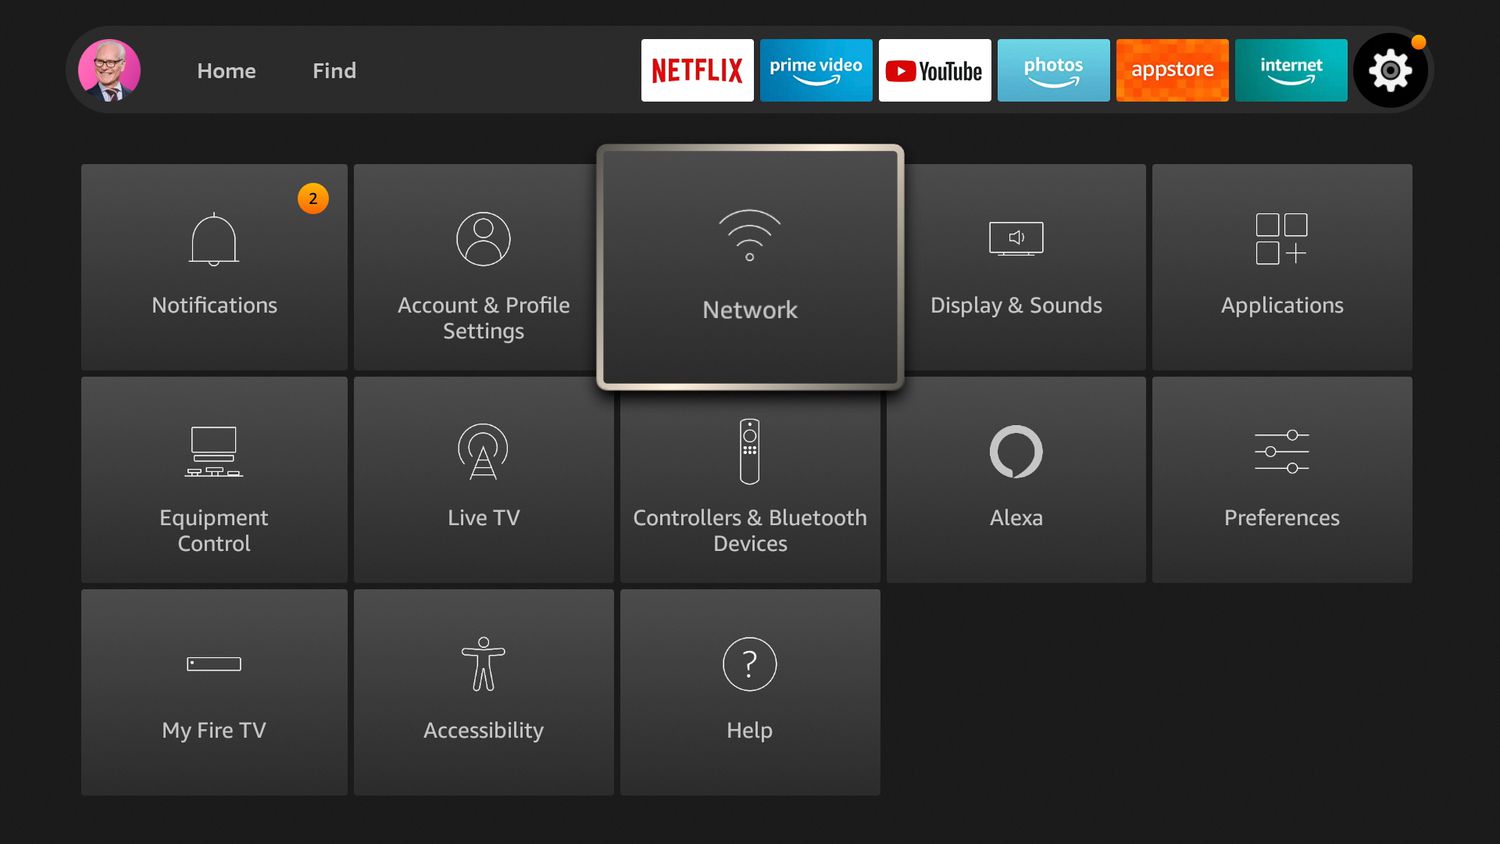 How To Connect Firestick To Wifi